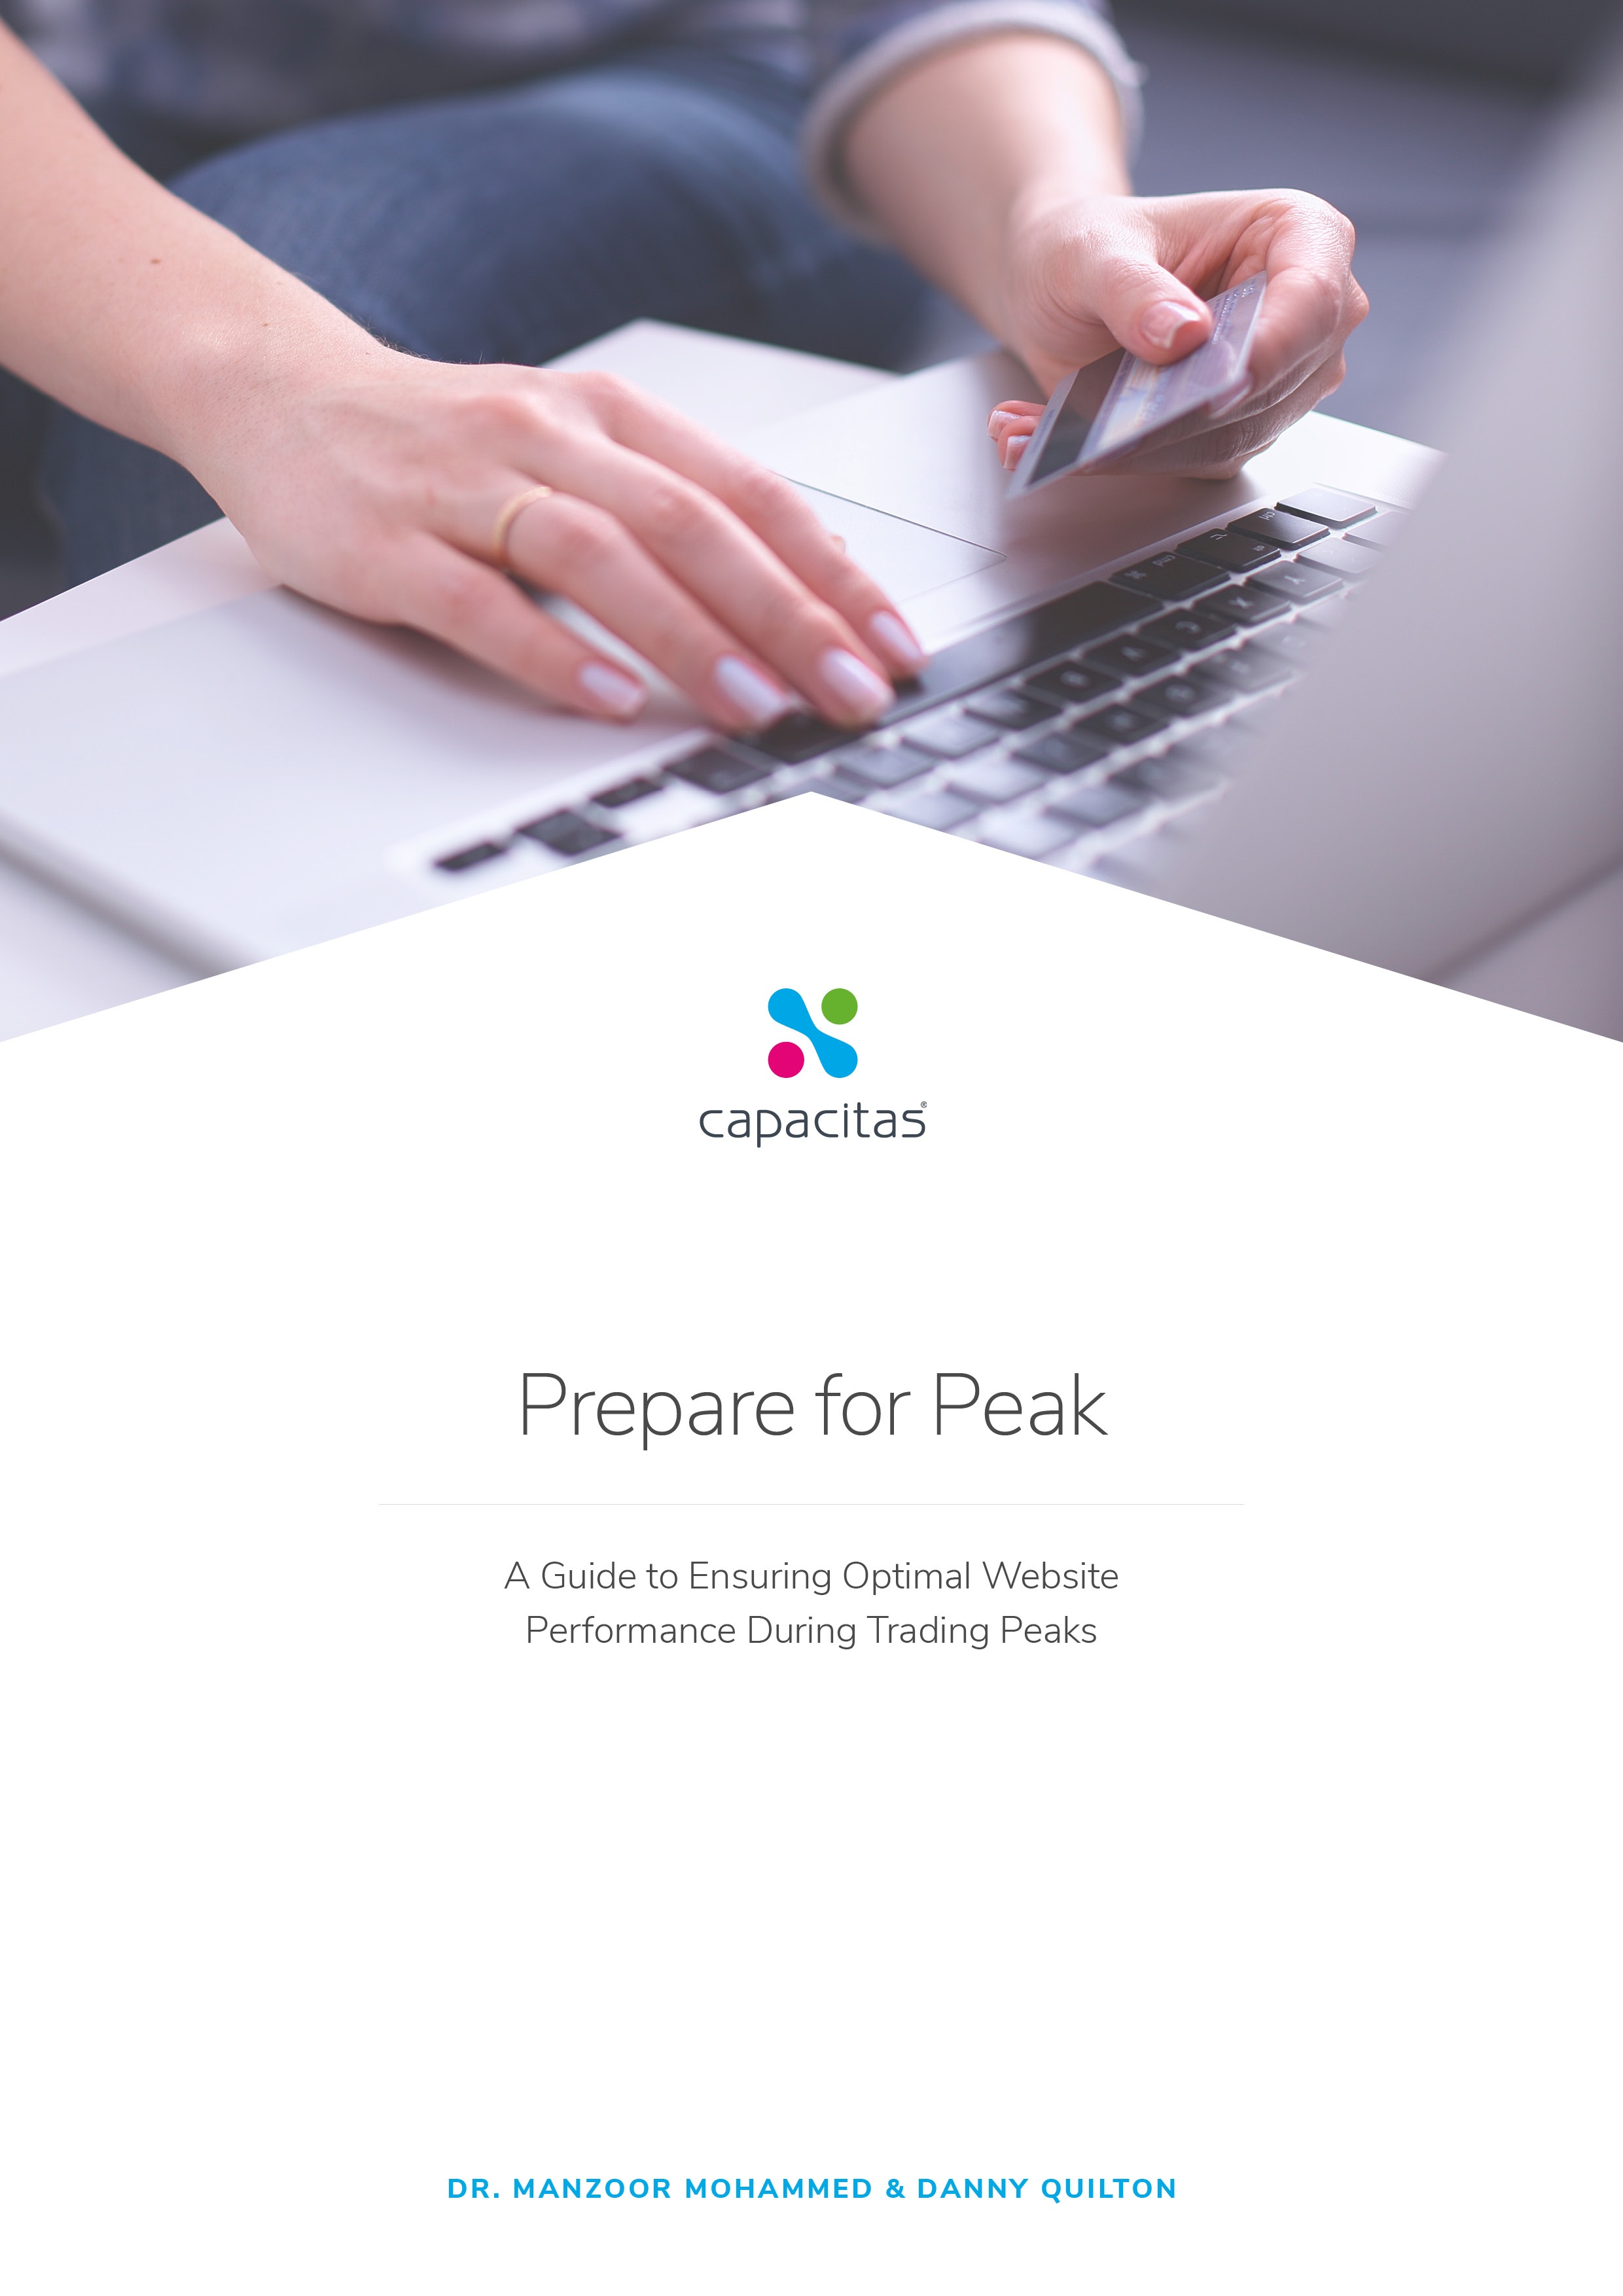 Prepare for Peak - A Guide to Ensuring Website Performance During Trading Peaks